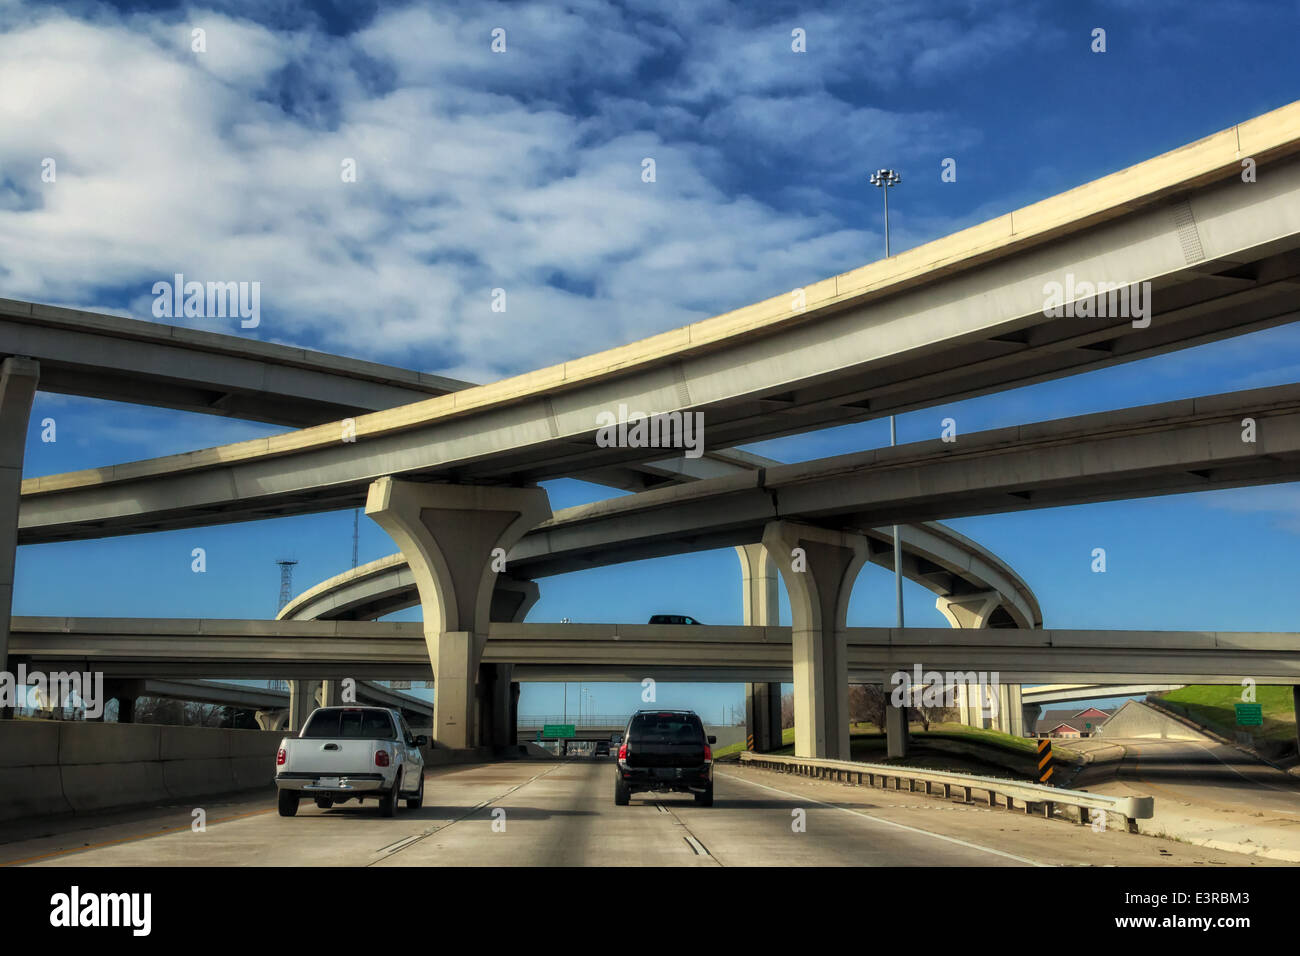 Traveling on the interstate going under an overpass in Shreveport Louisiana on I-20. Stock Photo